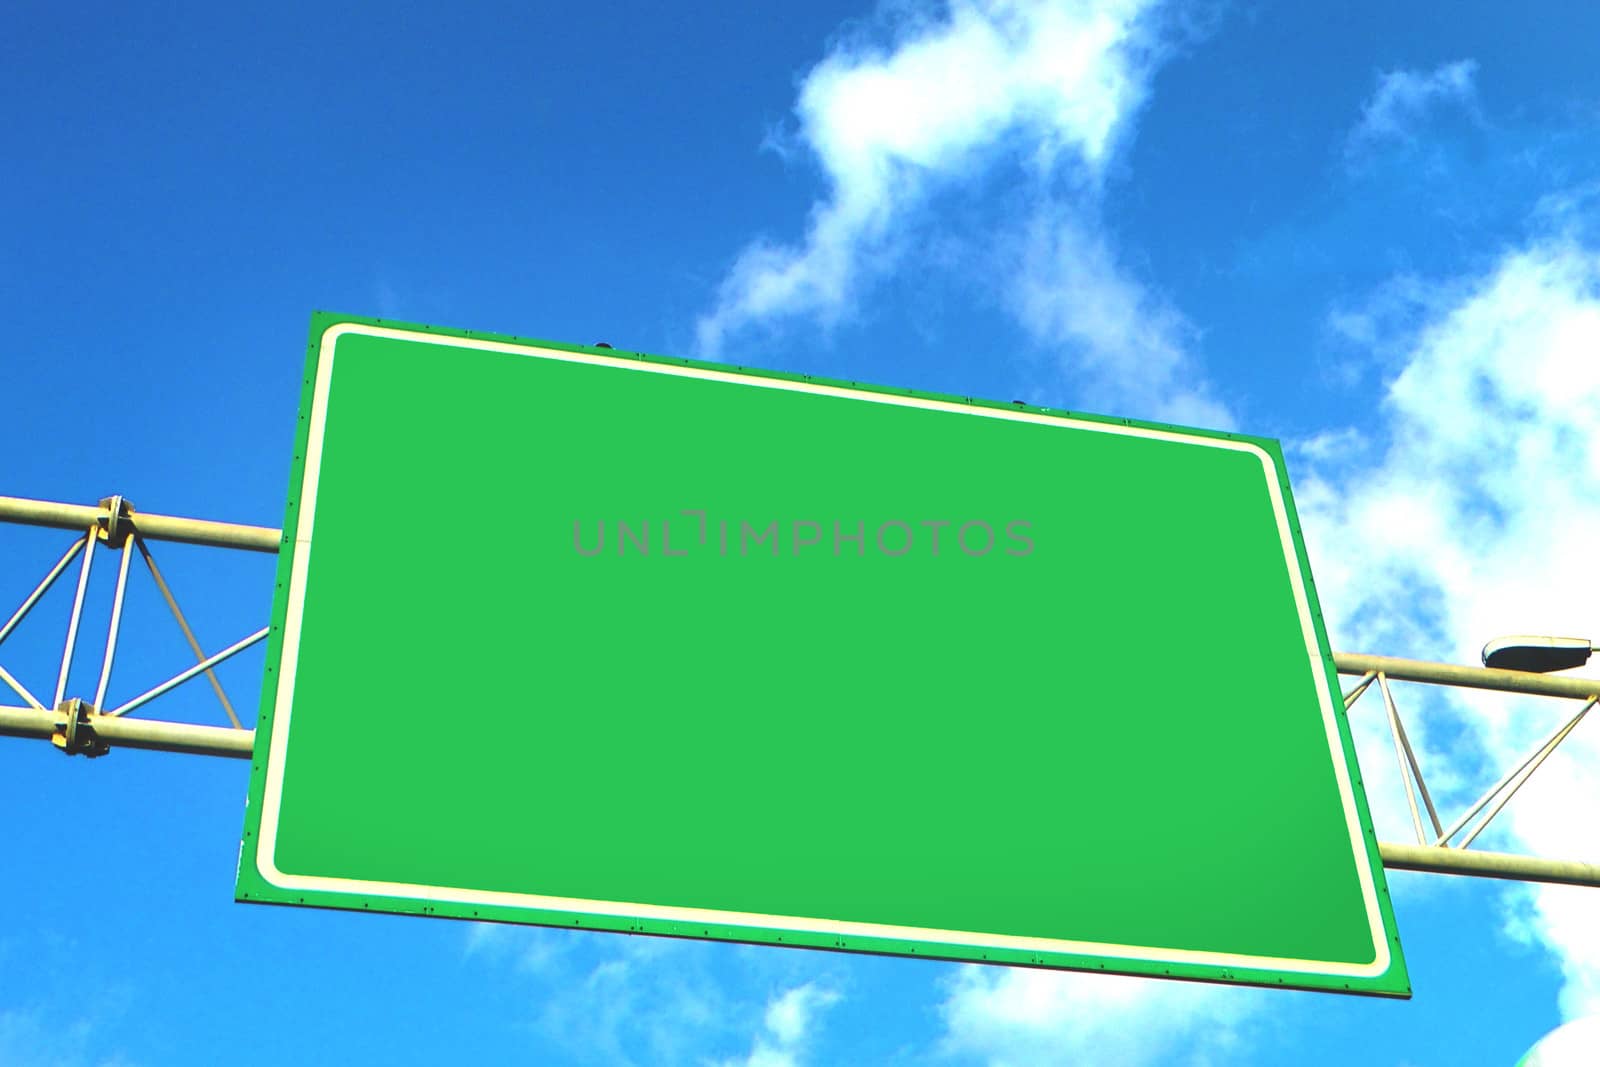 Blank green overhead traffic sign with copyspace for your text or destination against a cloudy sunny blue sky